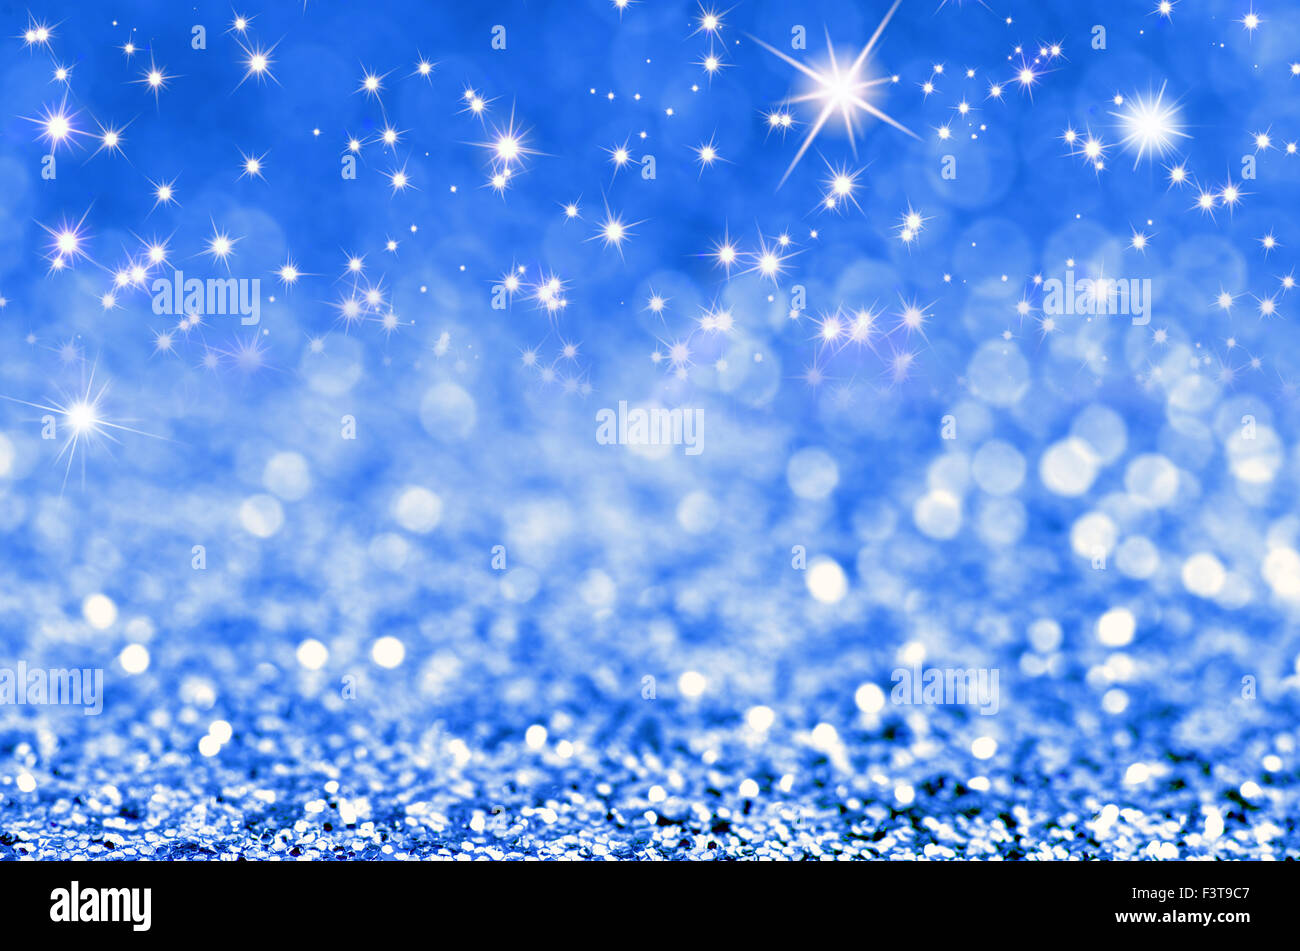 Abstract winter holiday christmas stars background Stock Photo